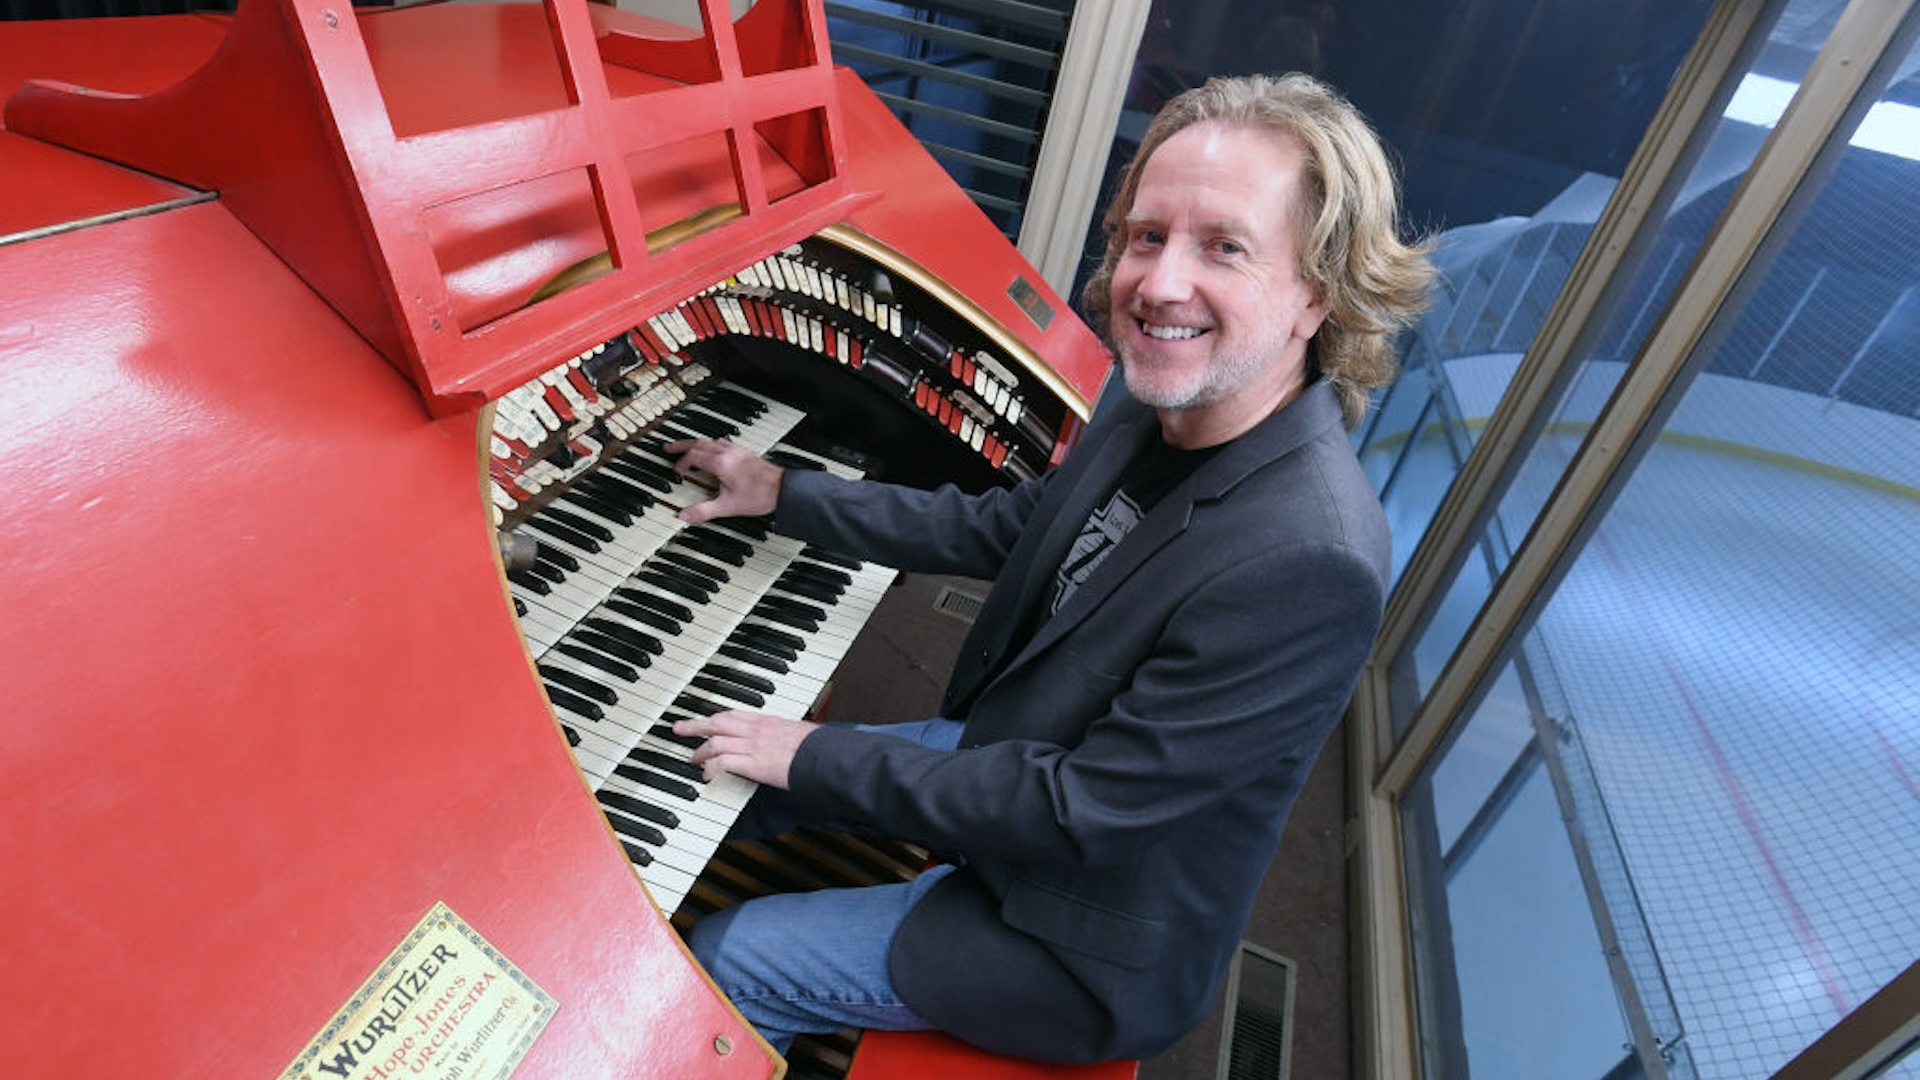 Los Angeles Kings music director, Dieter Ruehle, plays a 1941 Wurlitzer organ during the ribbon cutting and reopening of the LA Kings Iceland at Paramount on October 26, 2022 in Paramount California.